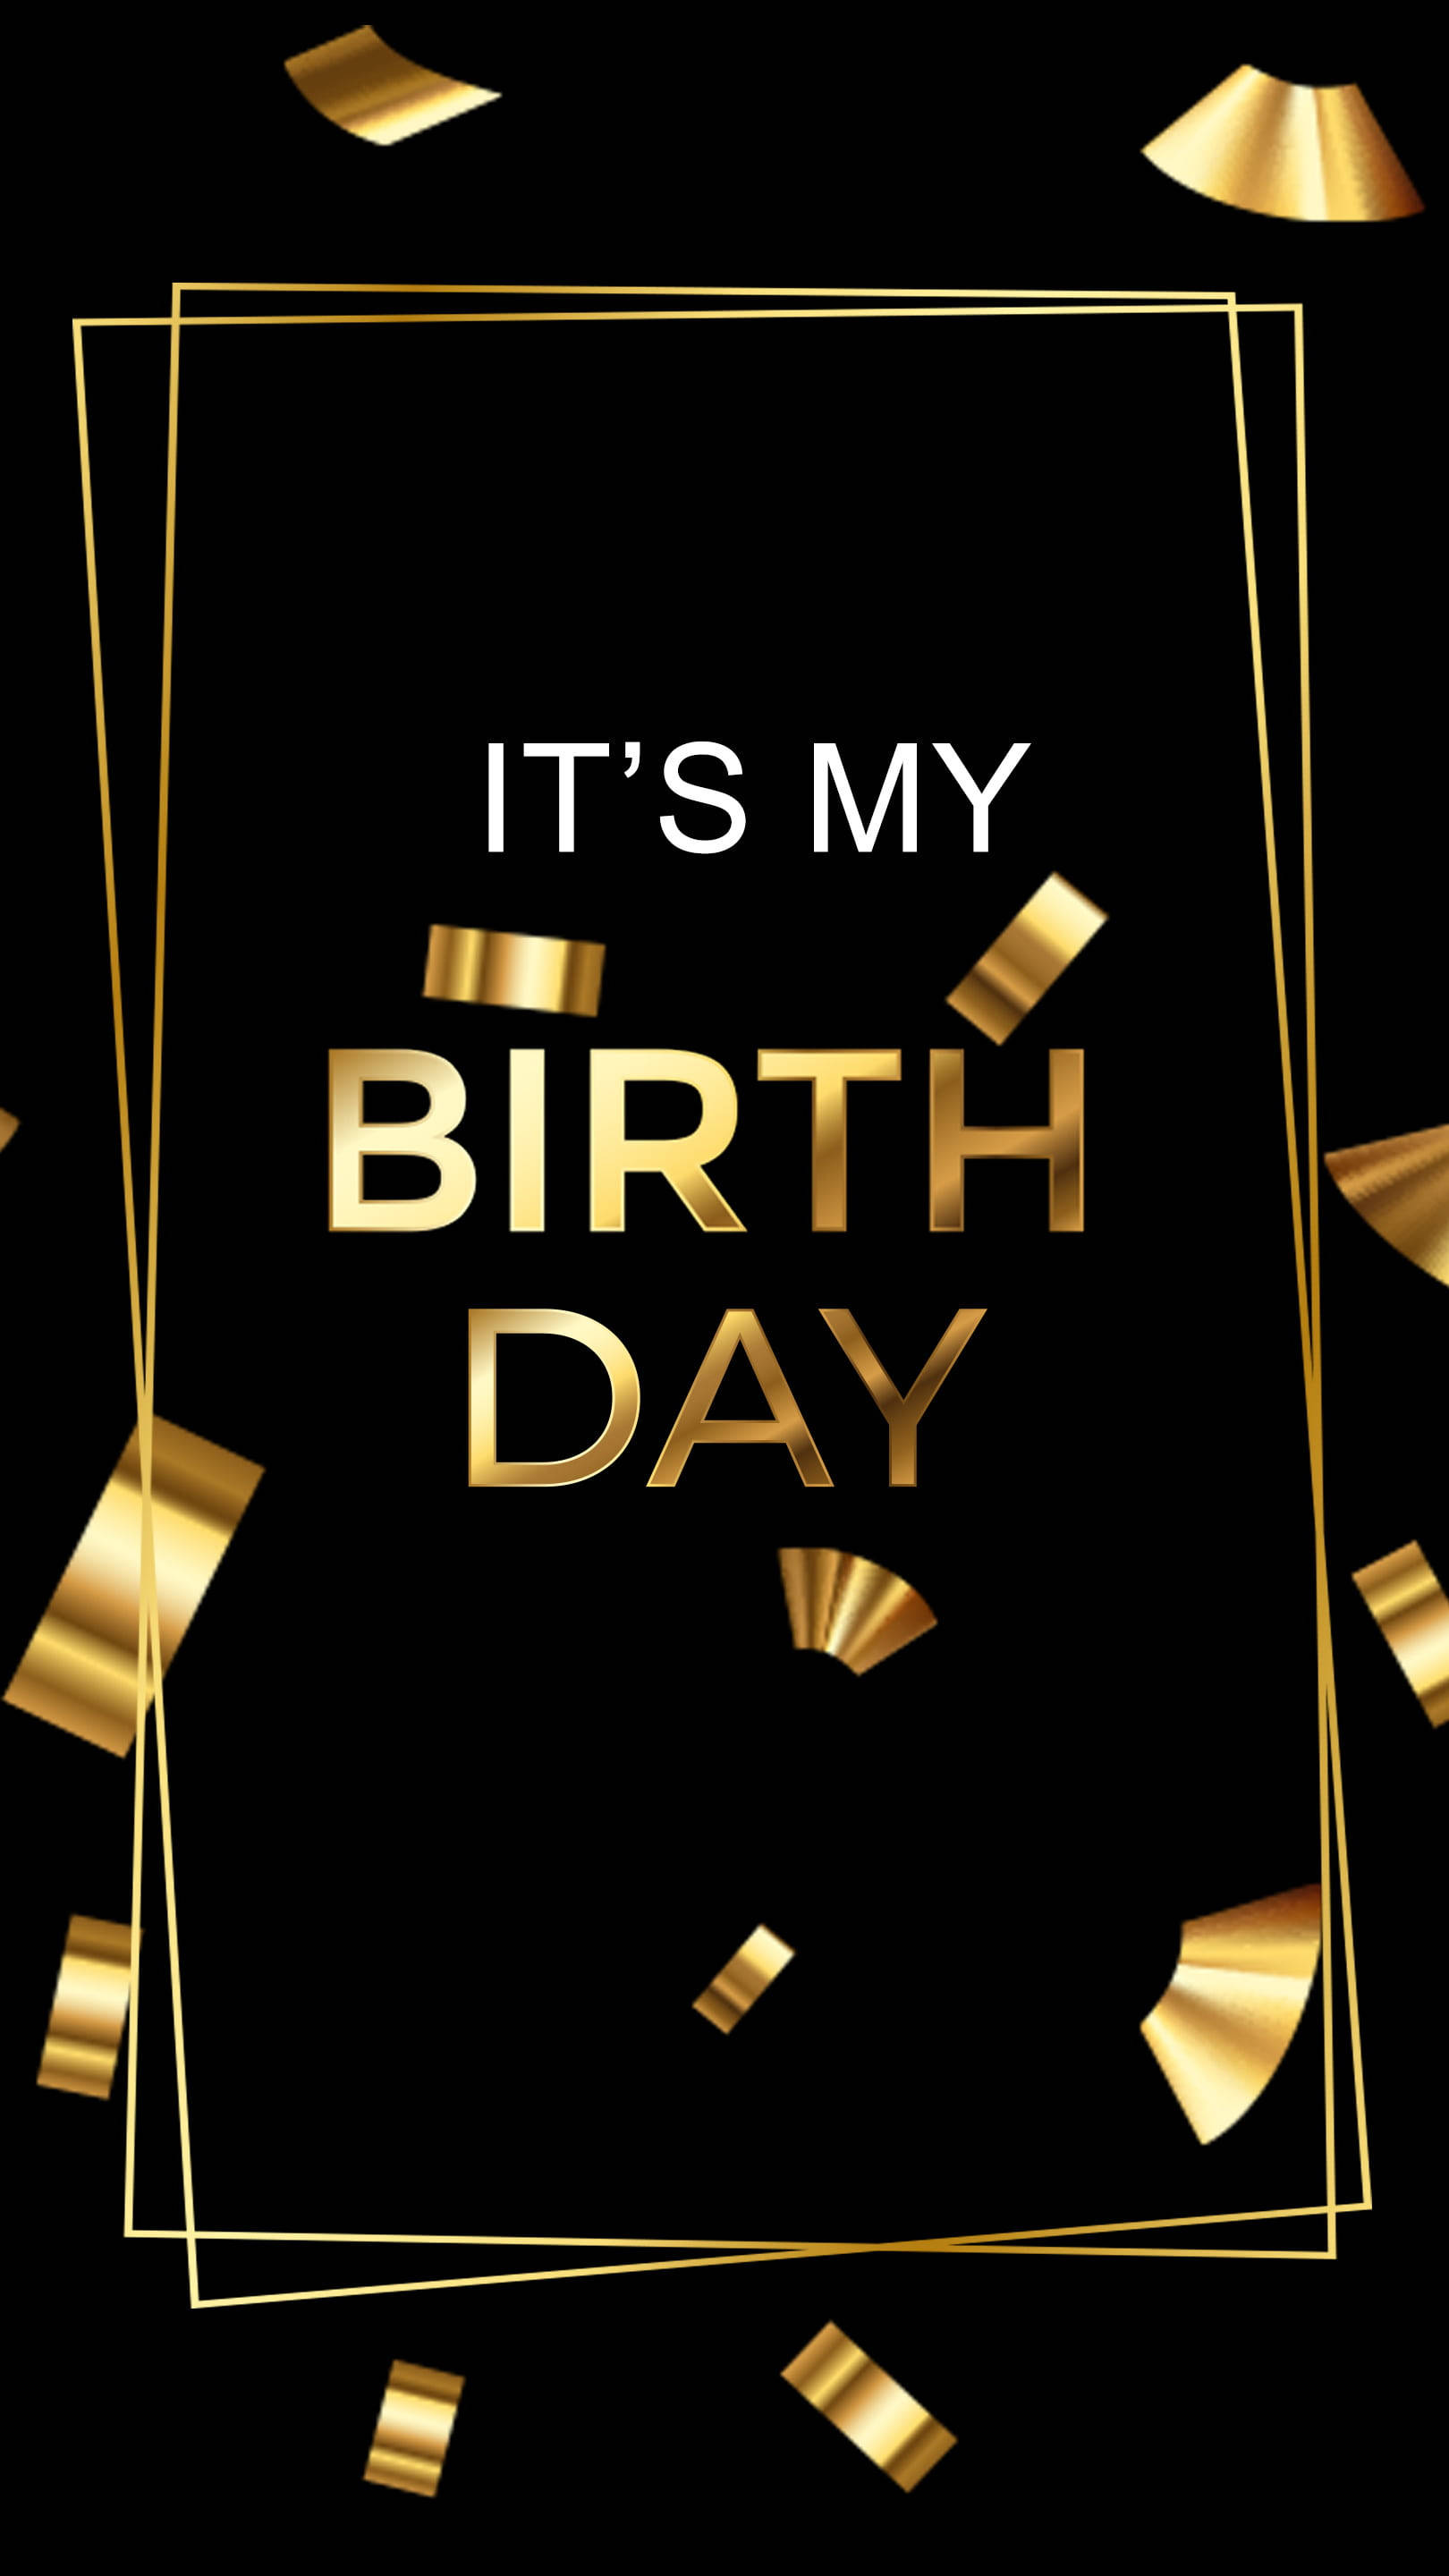 Download It's My Birthday Greeting In Black And Gold Wallpaper | Wallpapers .com